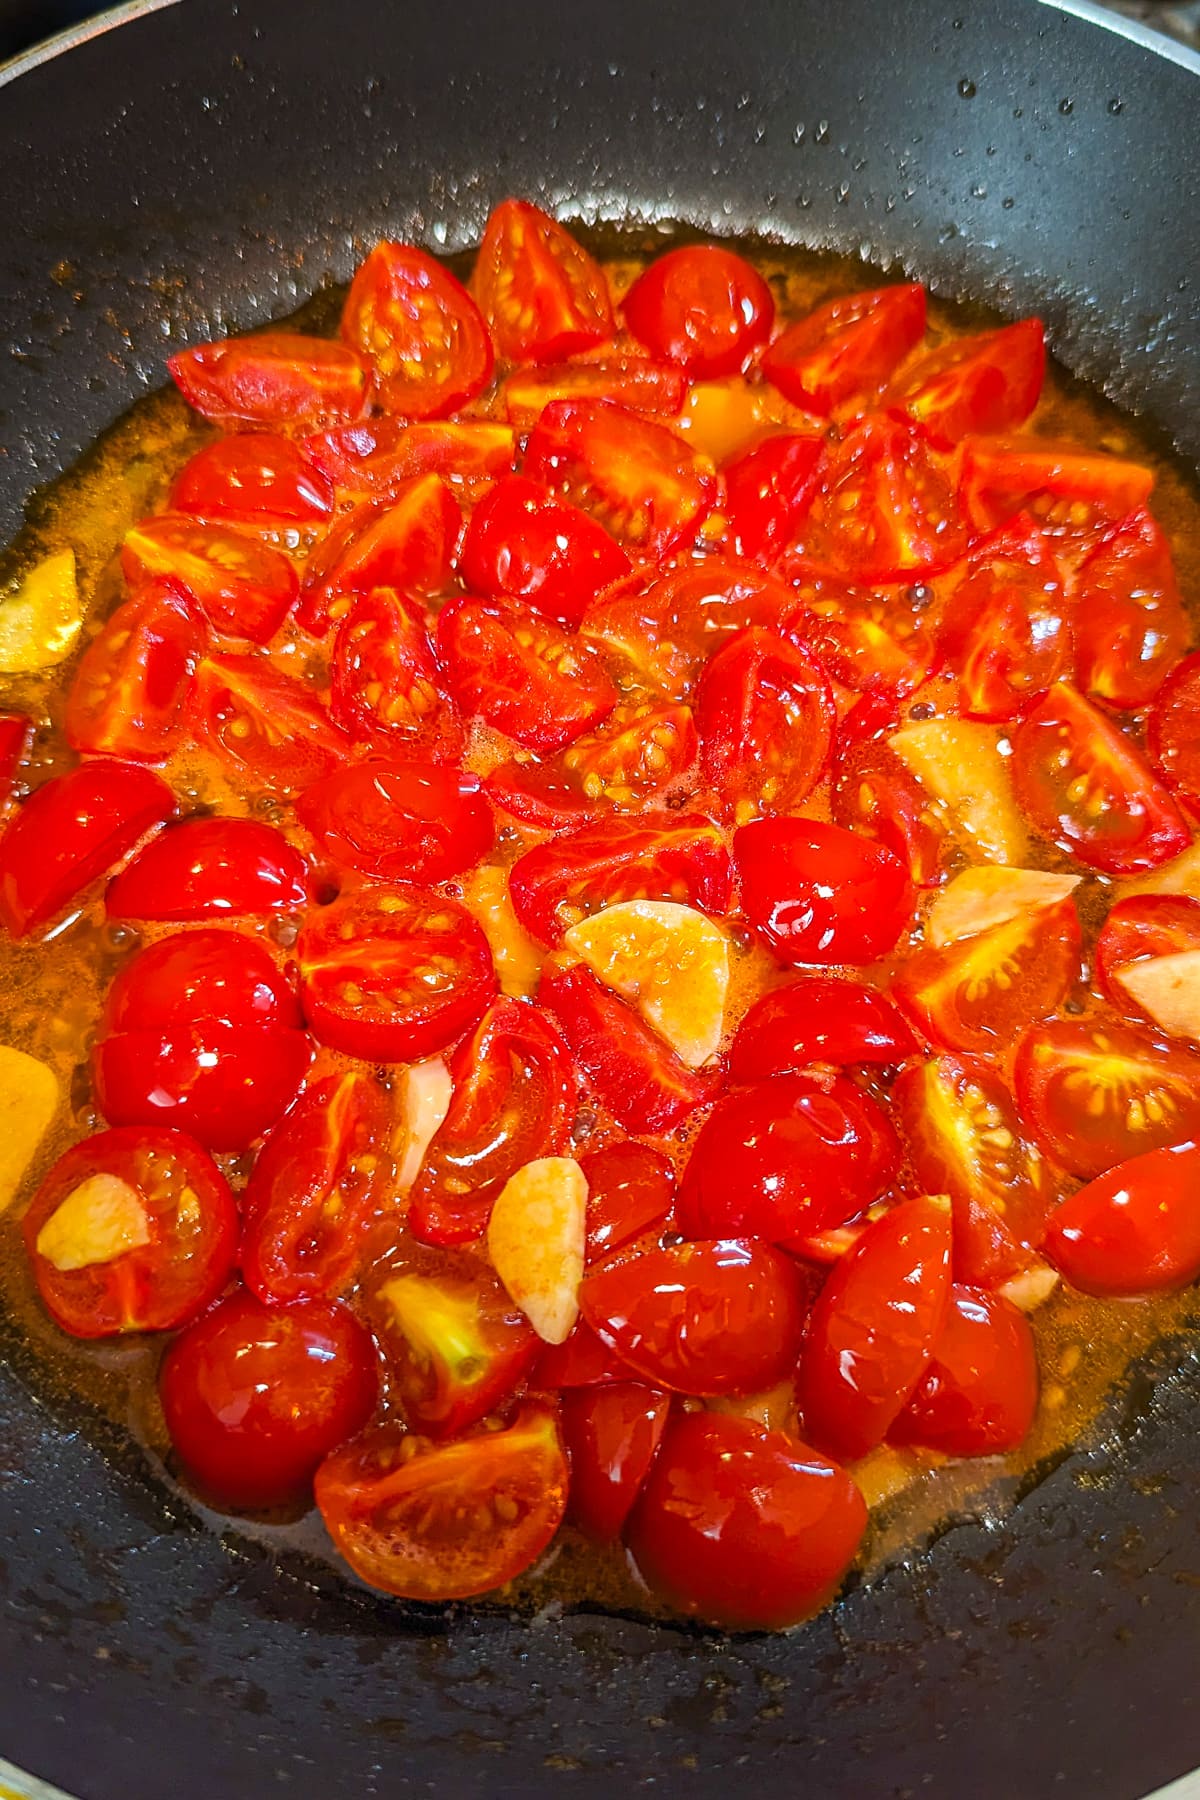 Cooked tomatoes and garlic in a frying pan on the stove.